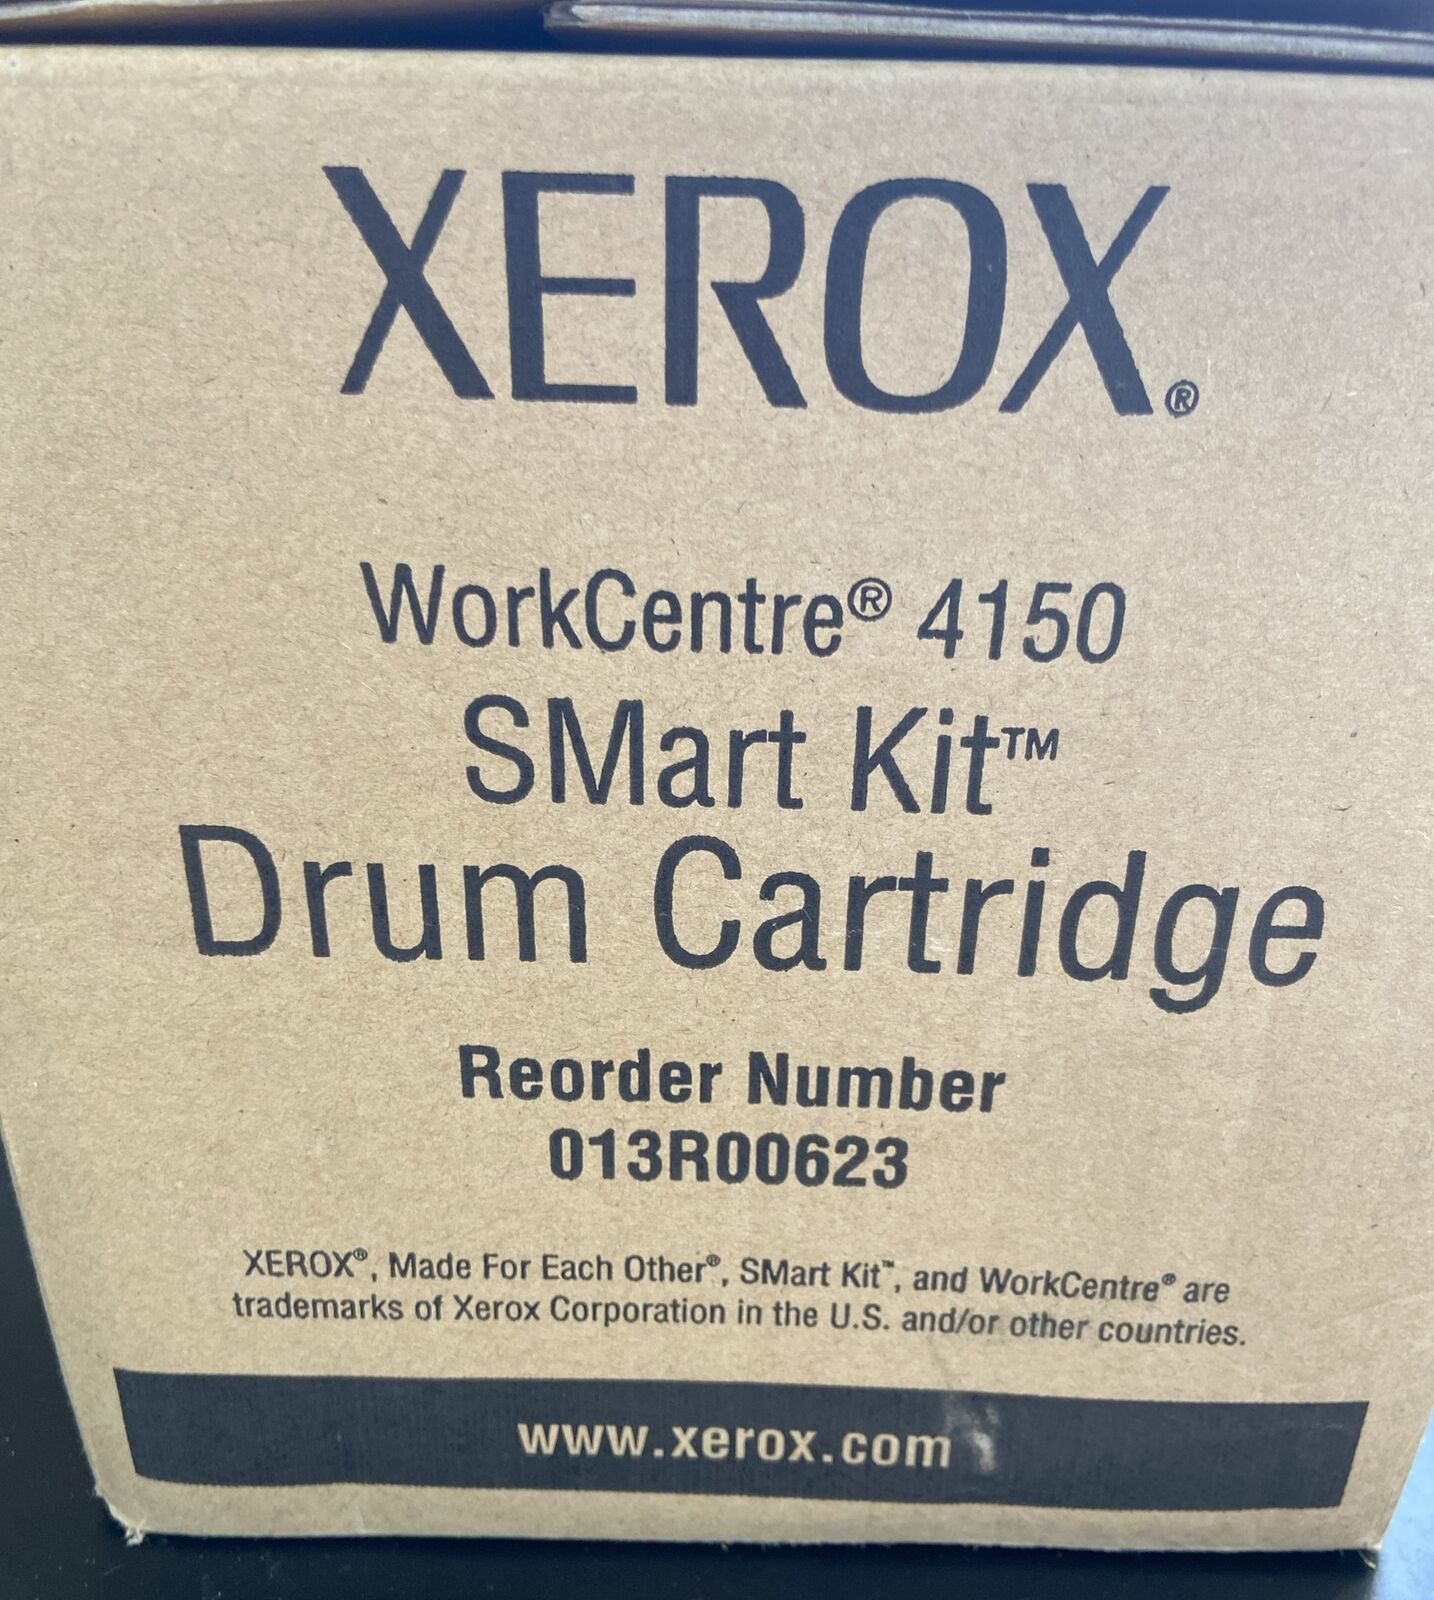 Xerox Smart Kit Drum Cartridge-013R00623, For WorkCentre 4150, NEW IN SEALED BAG